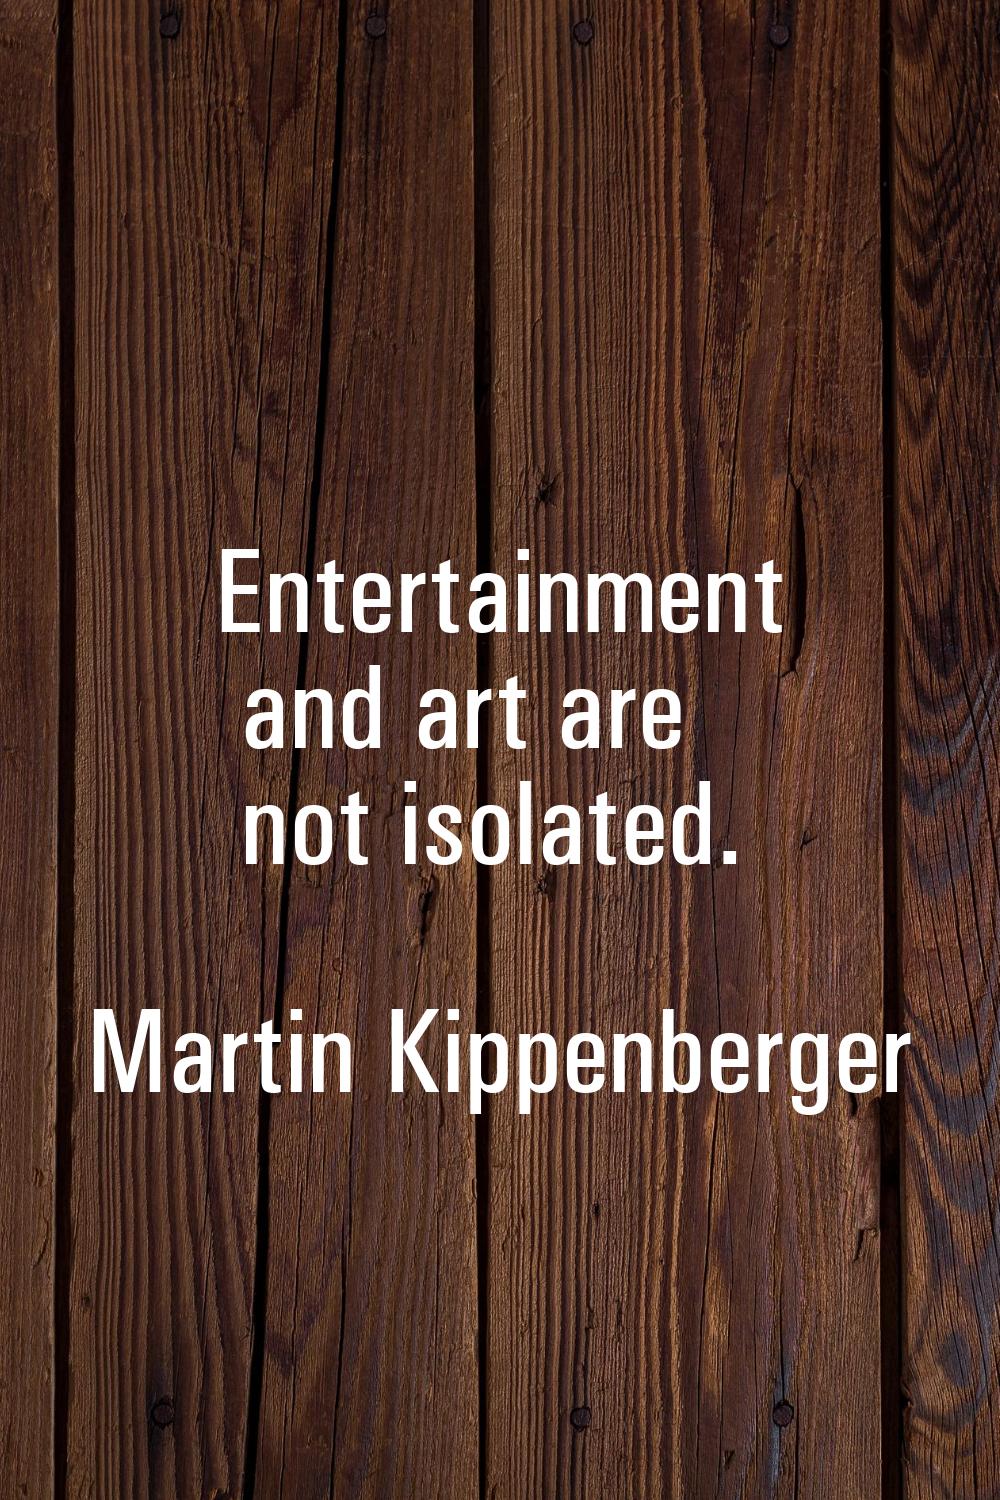 Entertainment and art are not isolated.